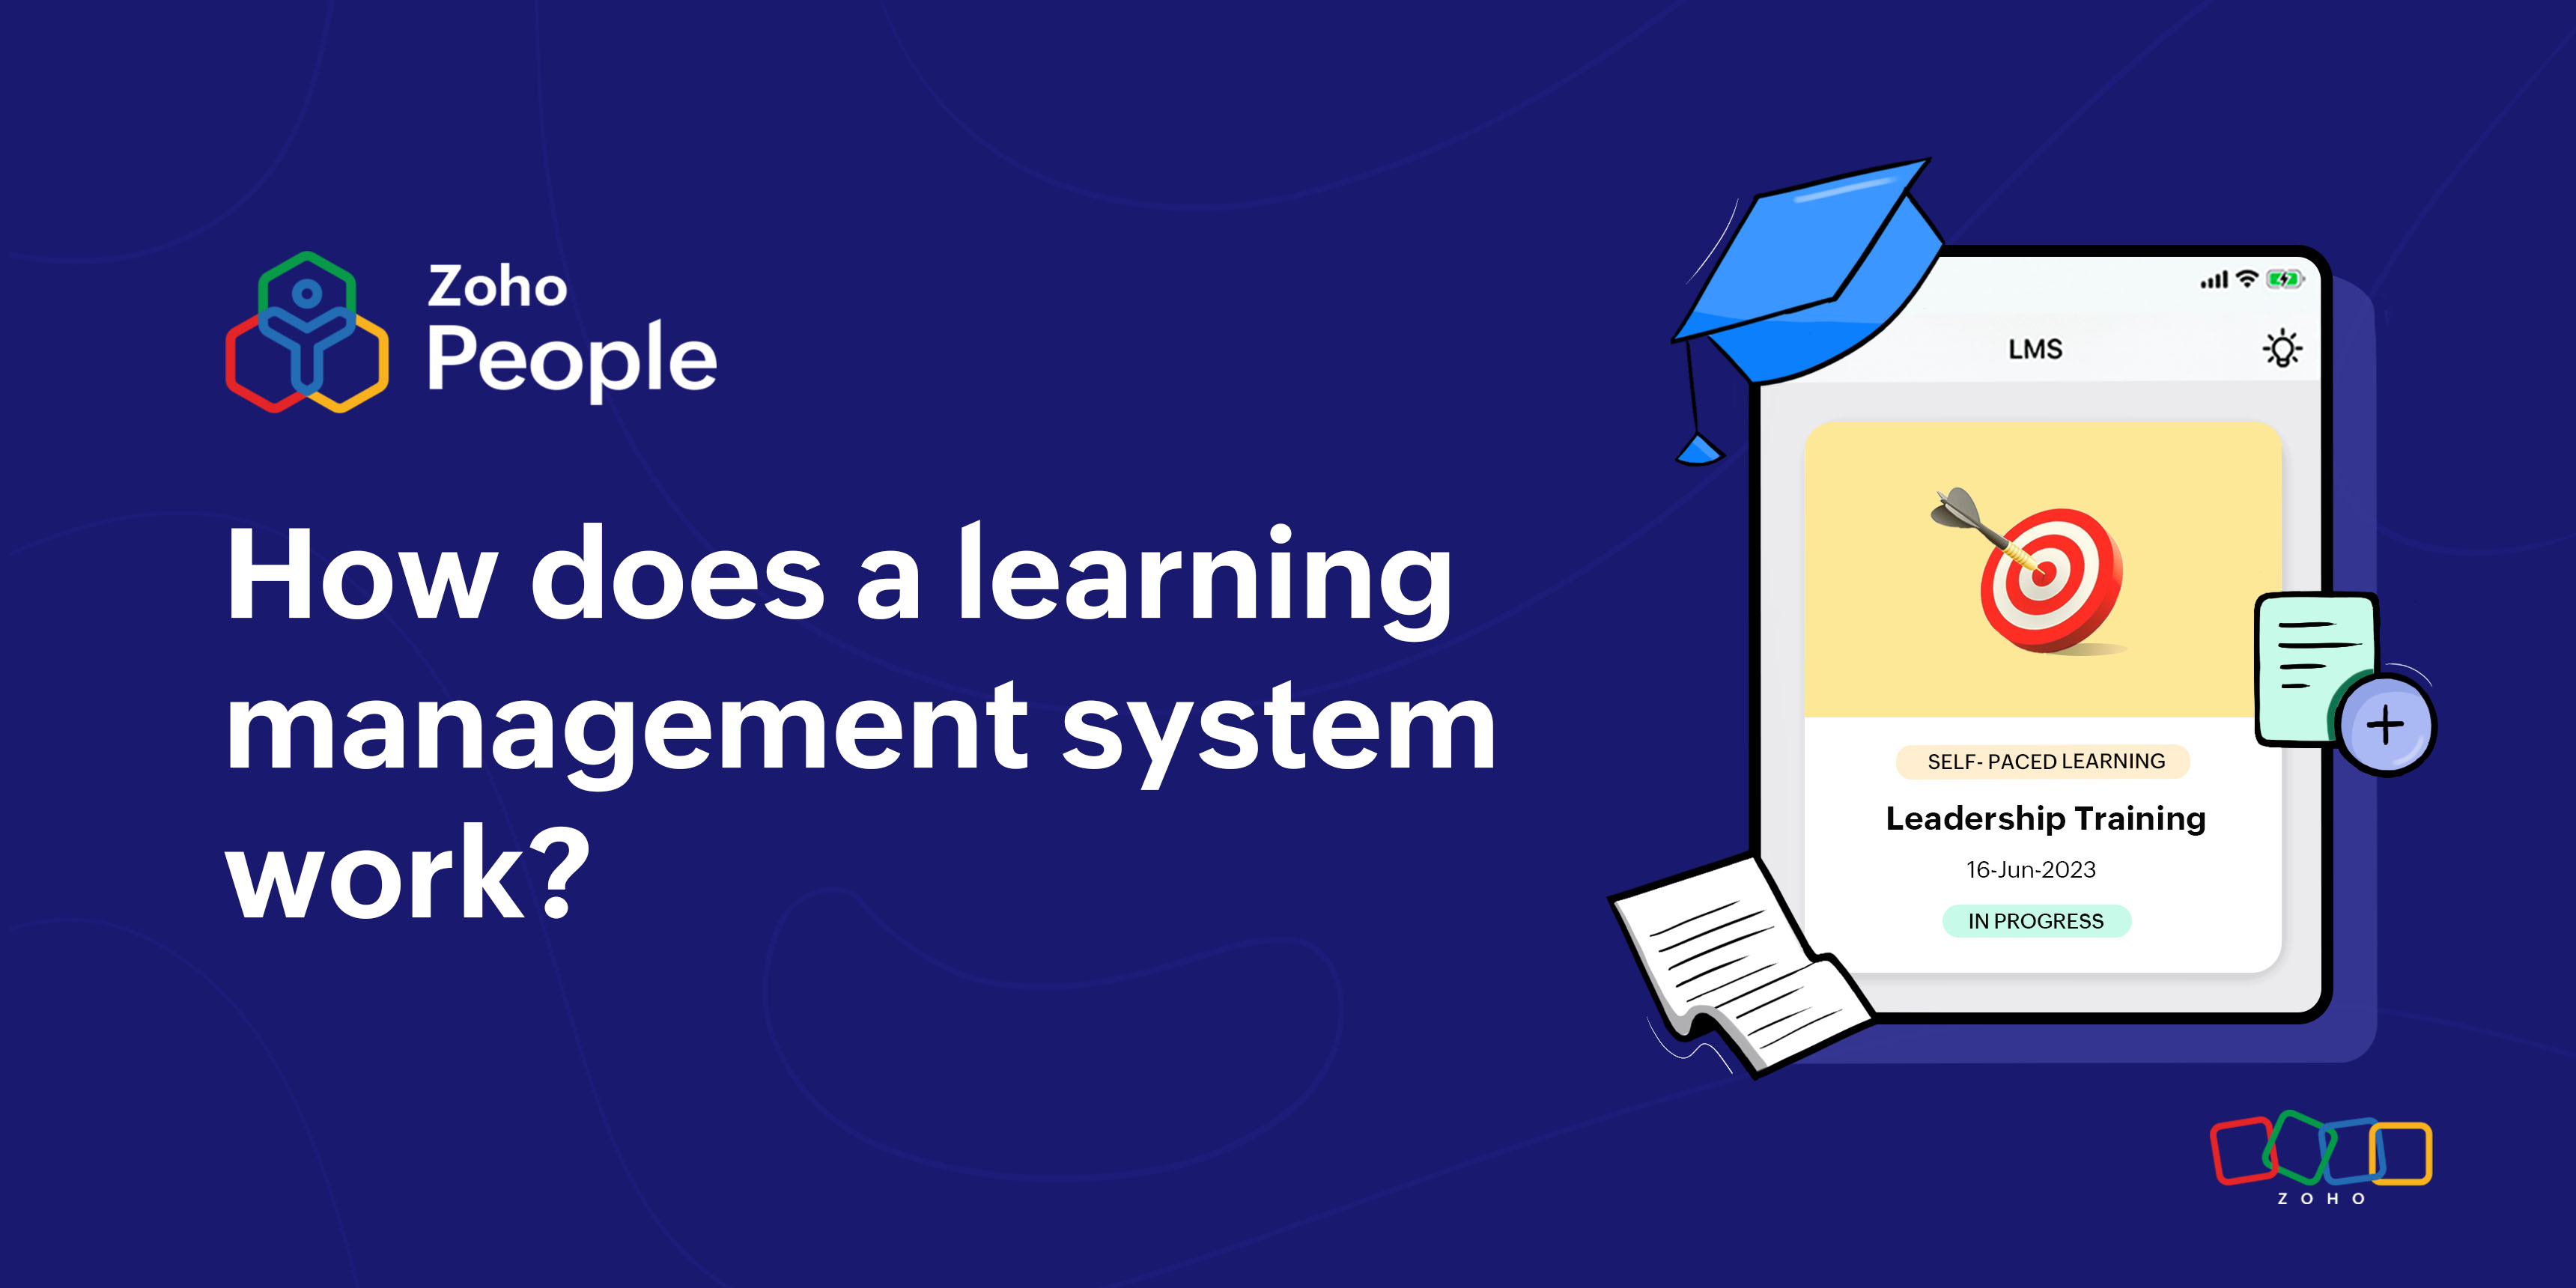 How does an LMS work?